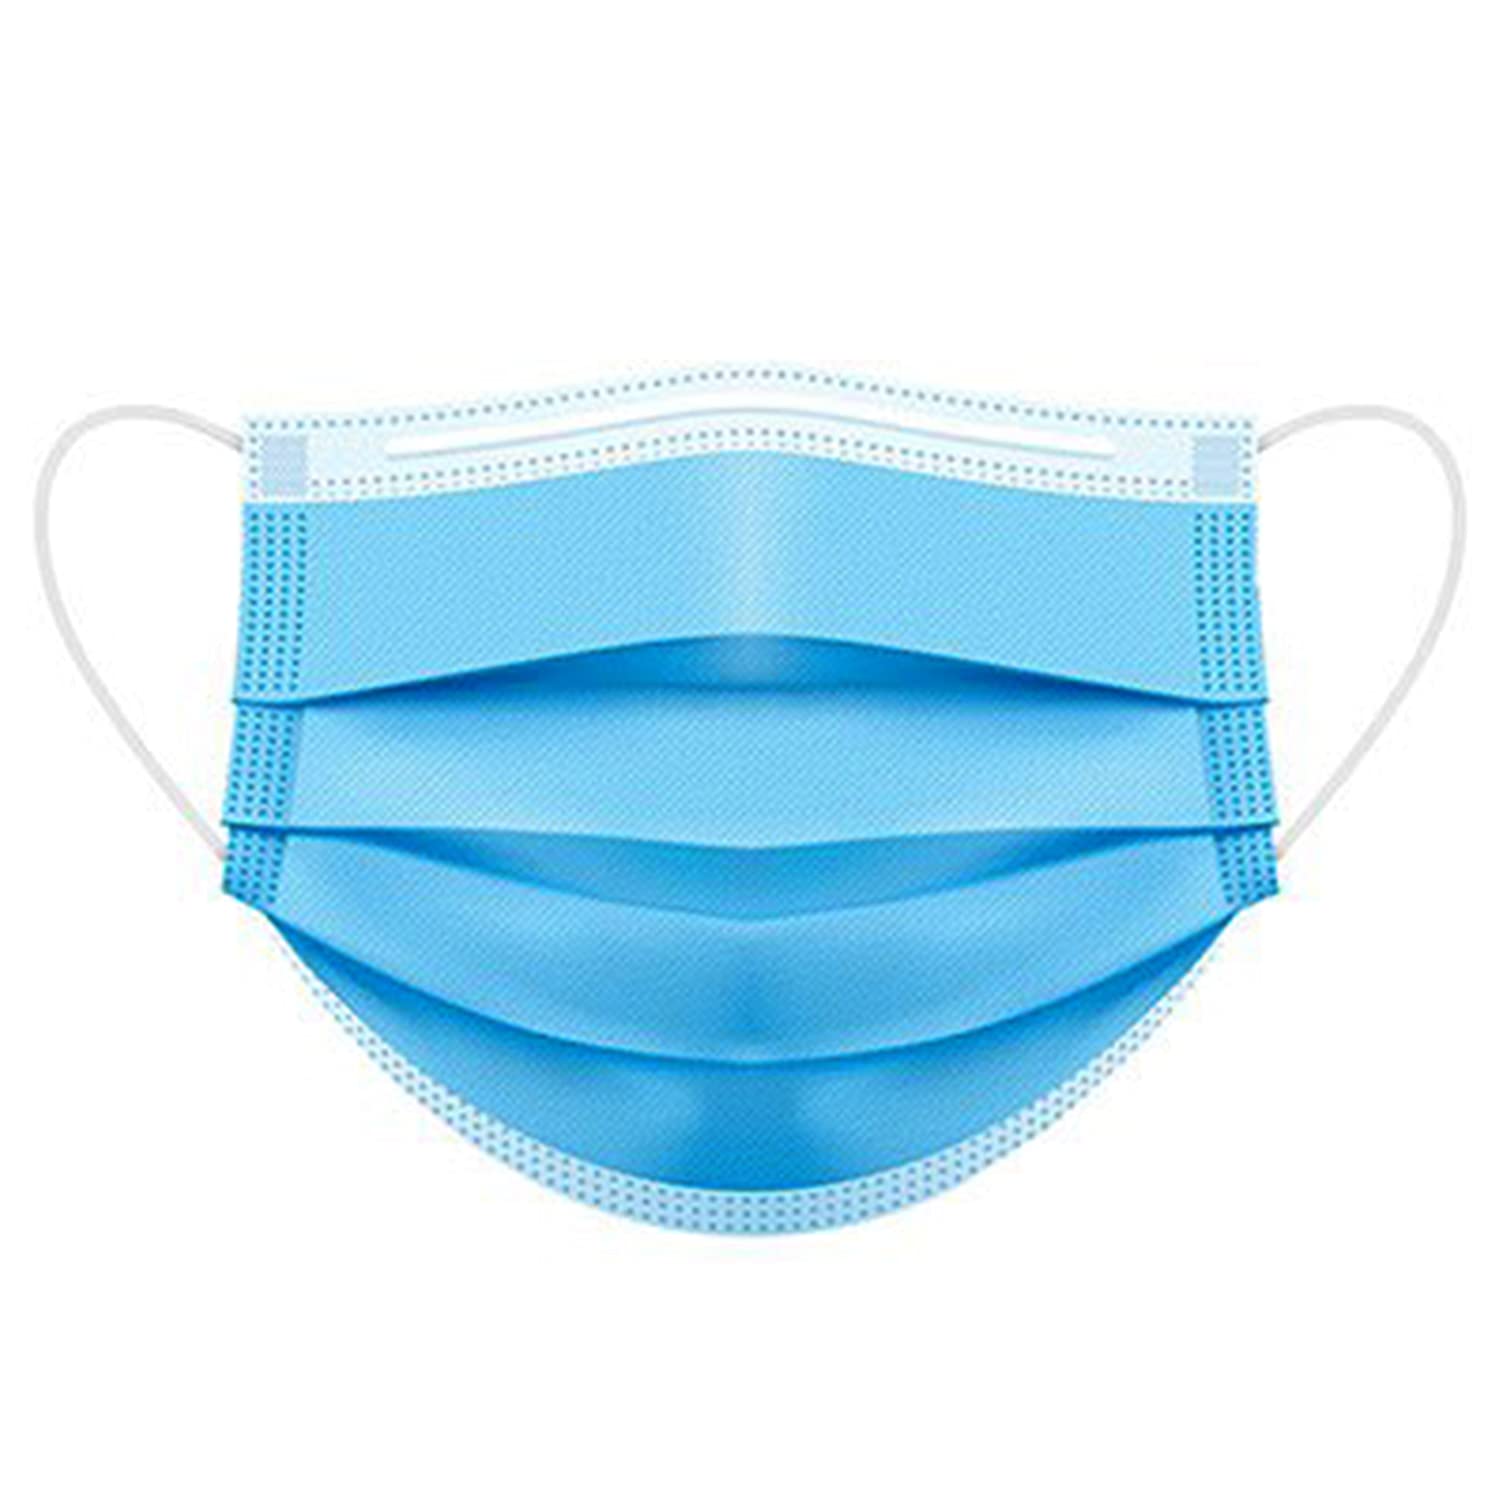 Omar Inc. 3 Ply Pleated Disposable Face Mask Adult One Size Box Of